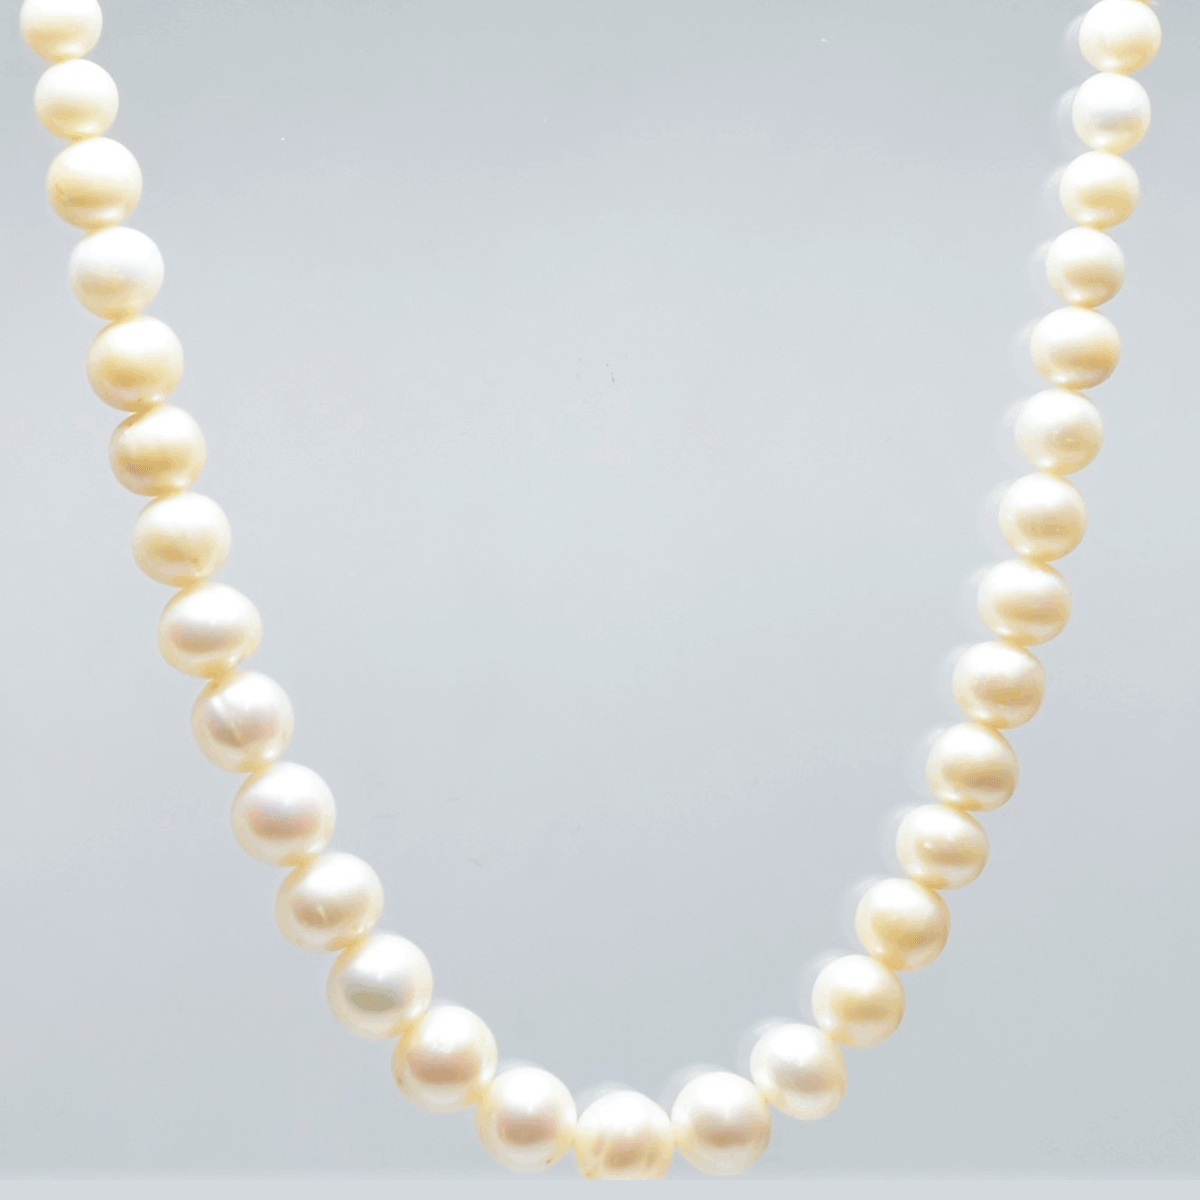 Buy Hazarilal Creations Flat Pearls Necklace for Women at Amazon.in